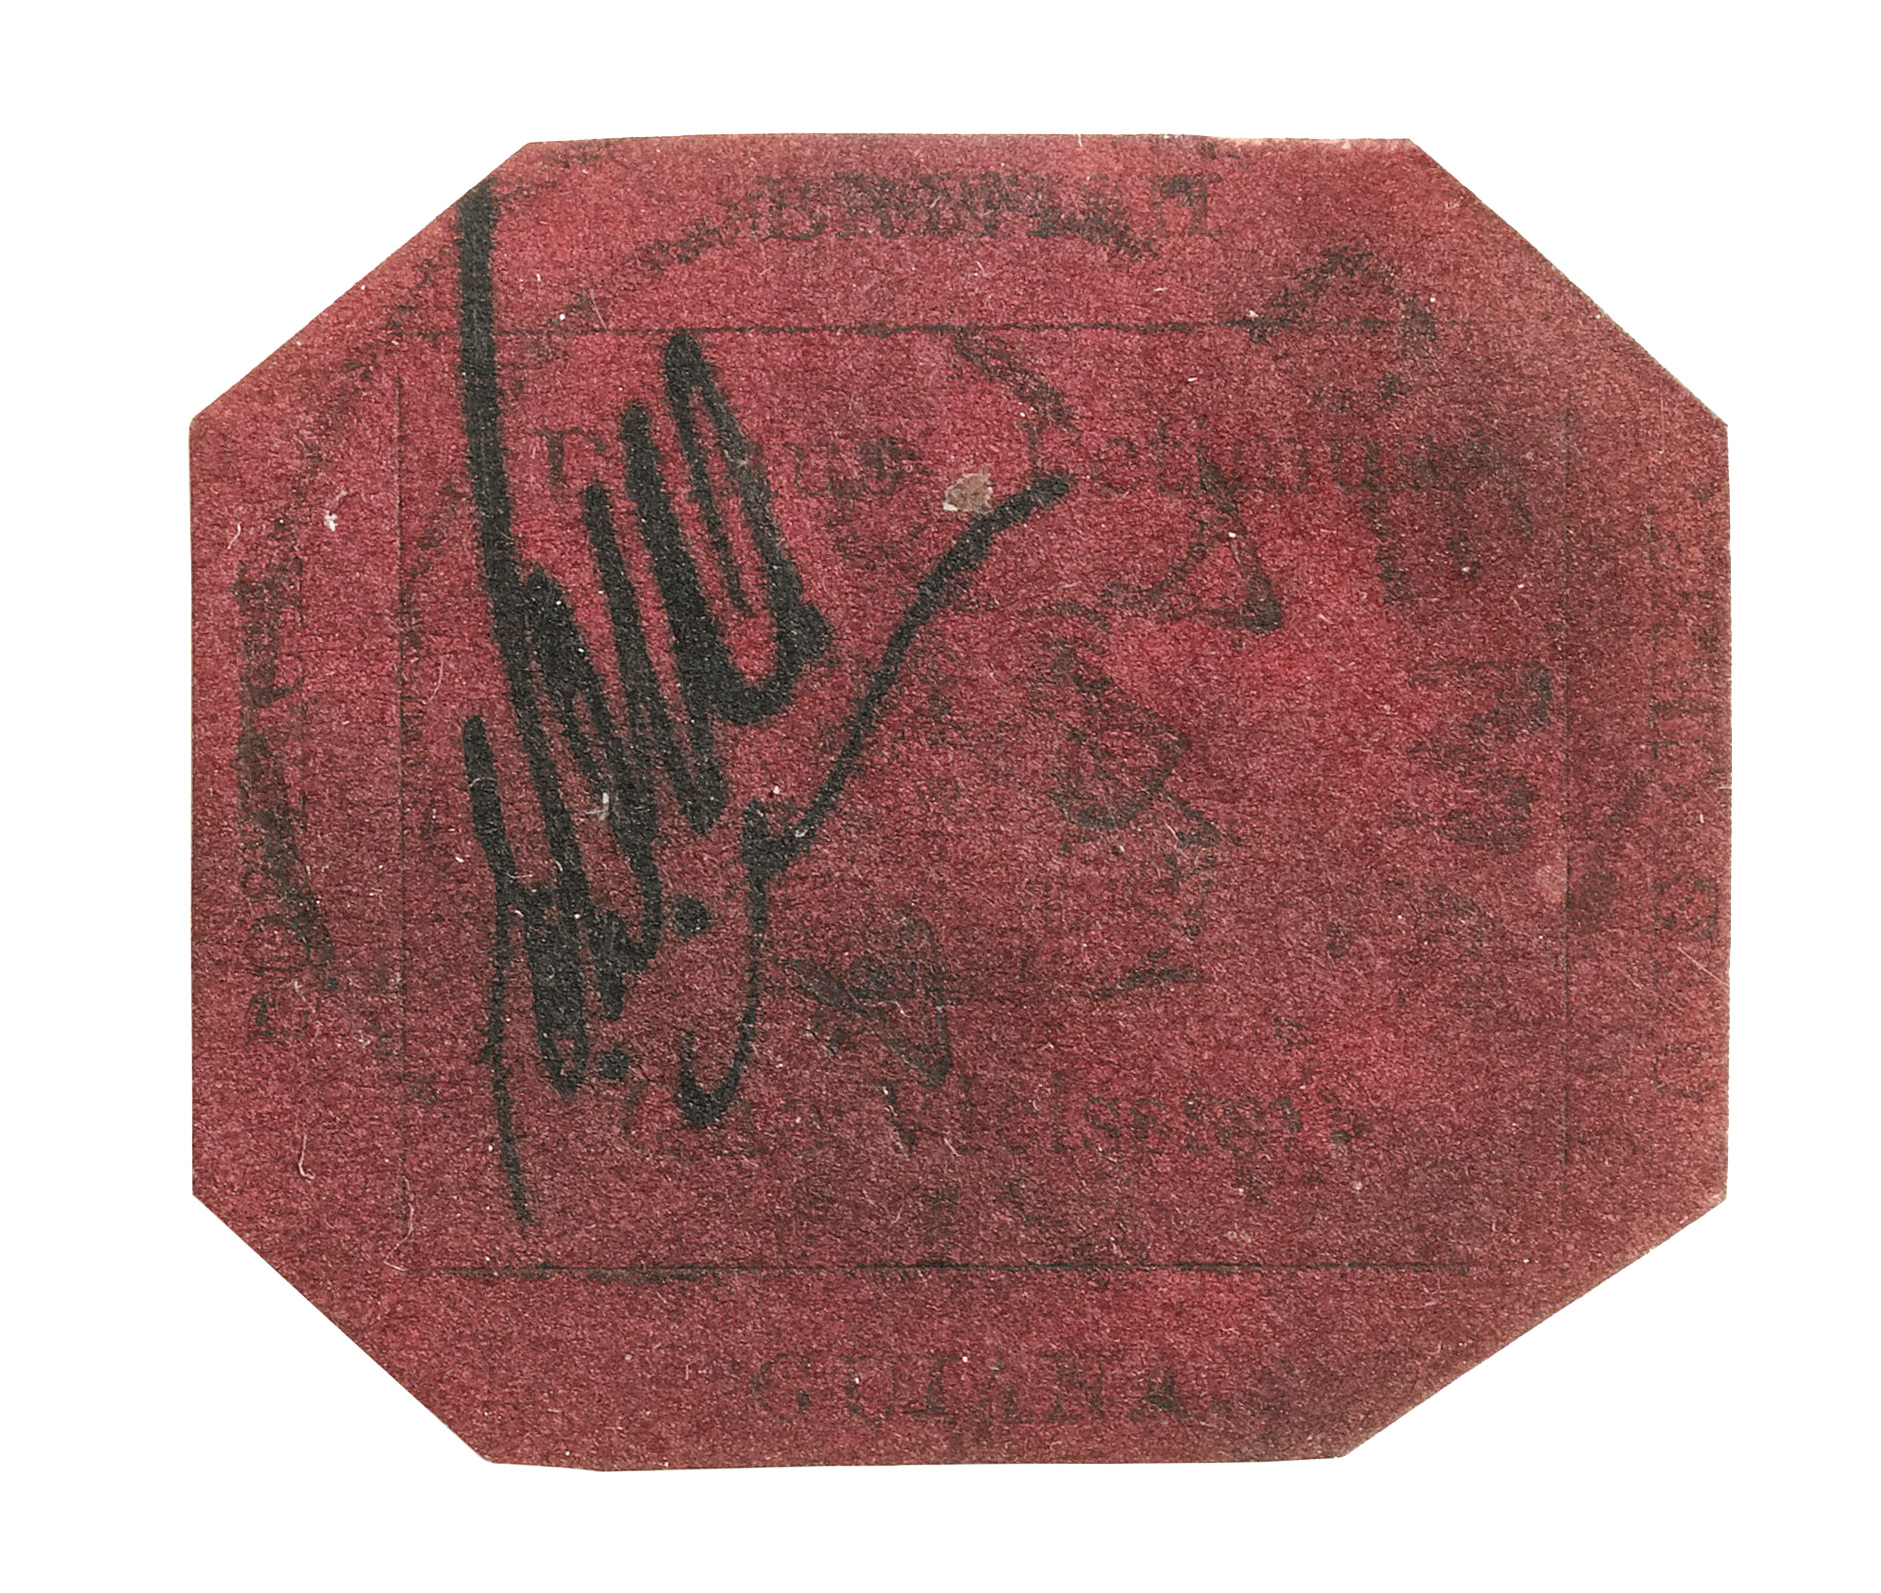 PHOTO: The one-cent 1856 British Guiana stamp has already set three price records for the sale of a single stamp, and the stamp is poised to set a fourth when it is offered at auction by Sotheby?s on June 17, 2104.